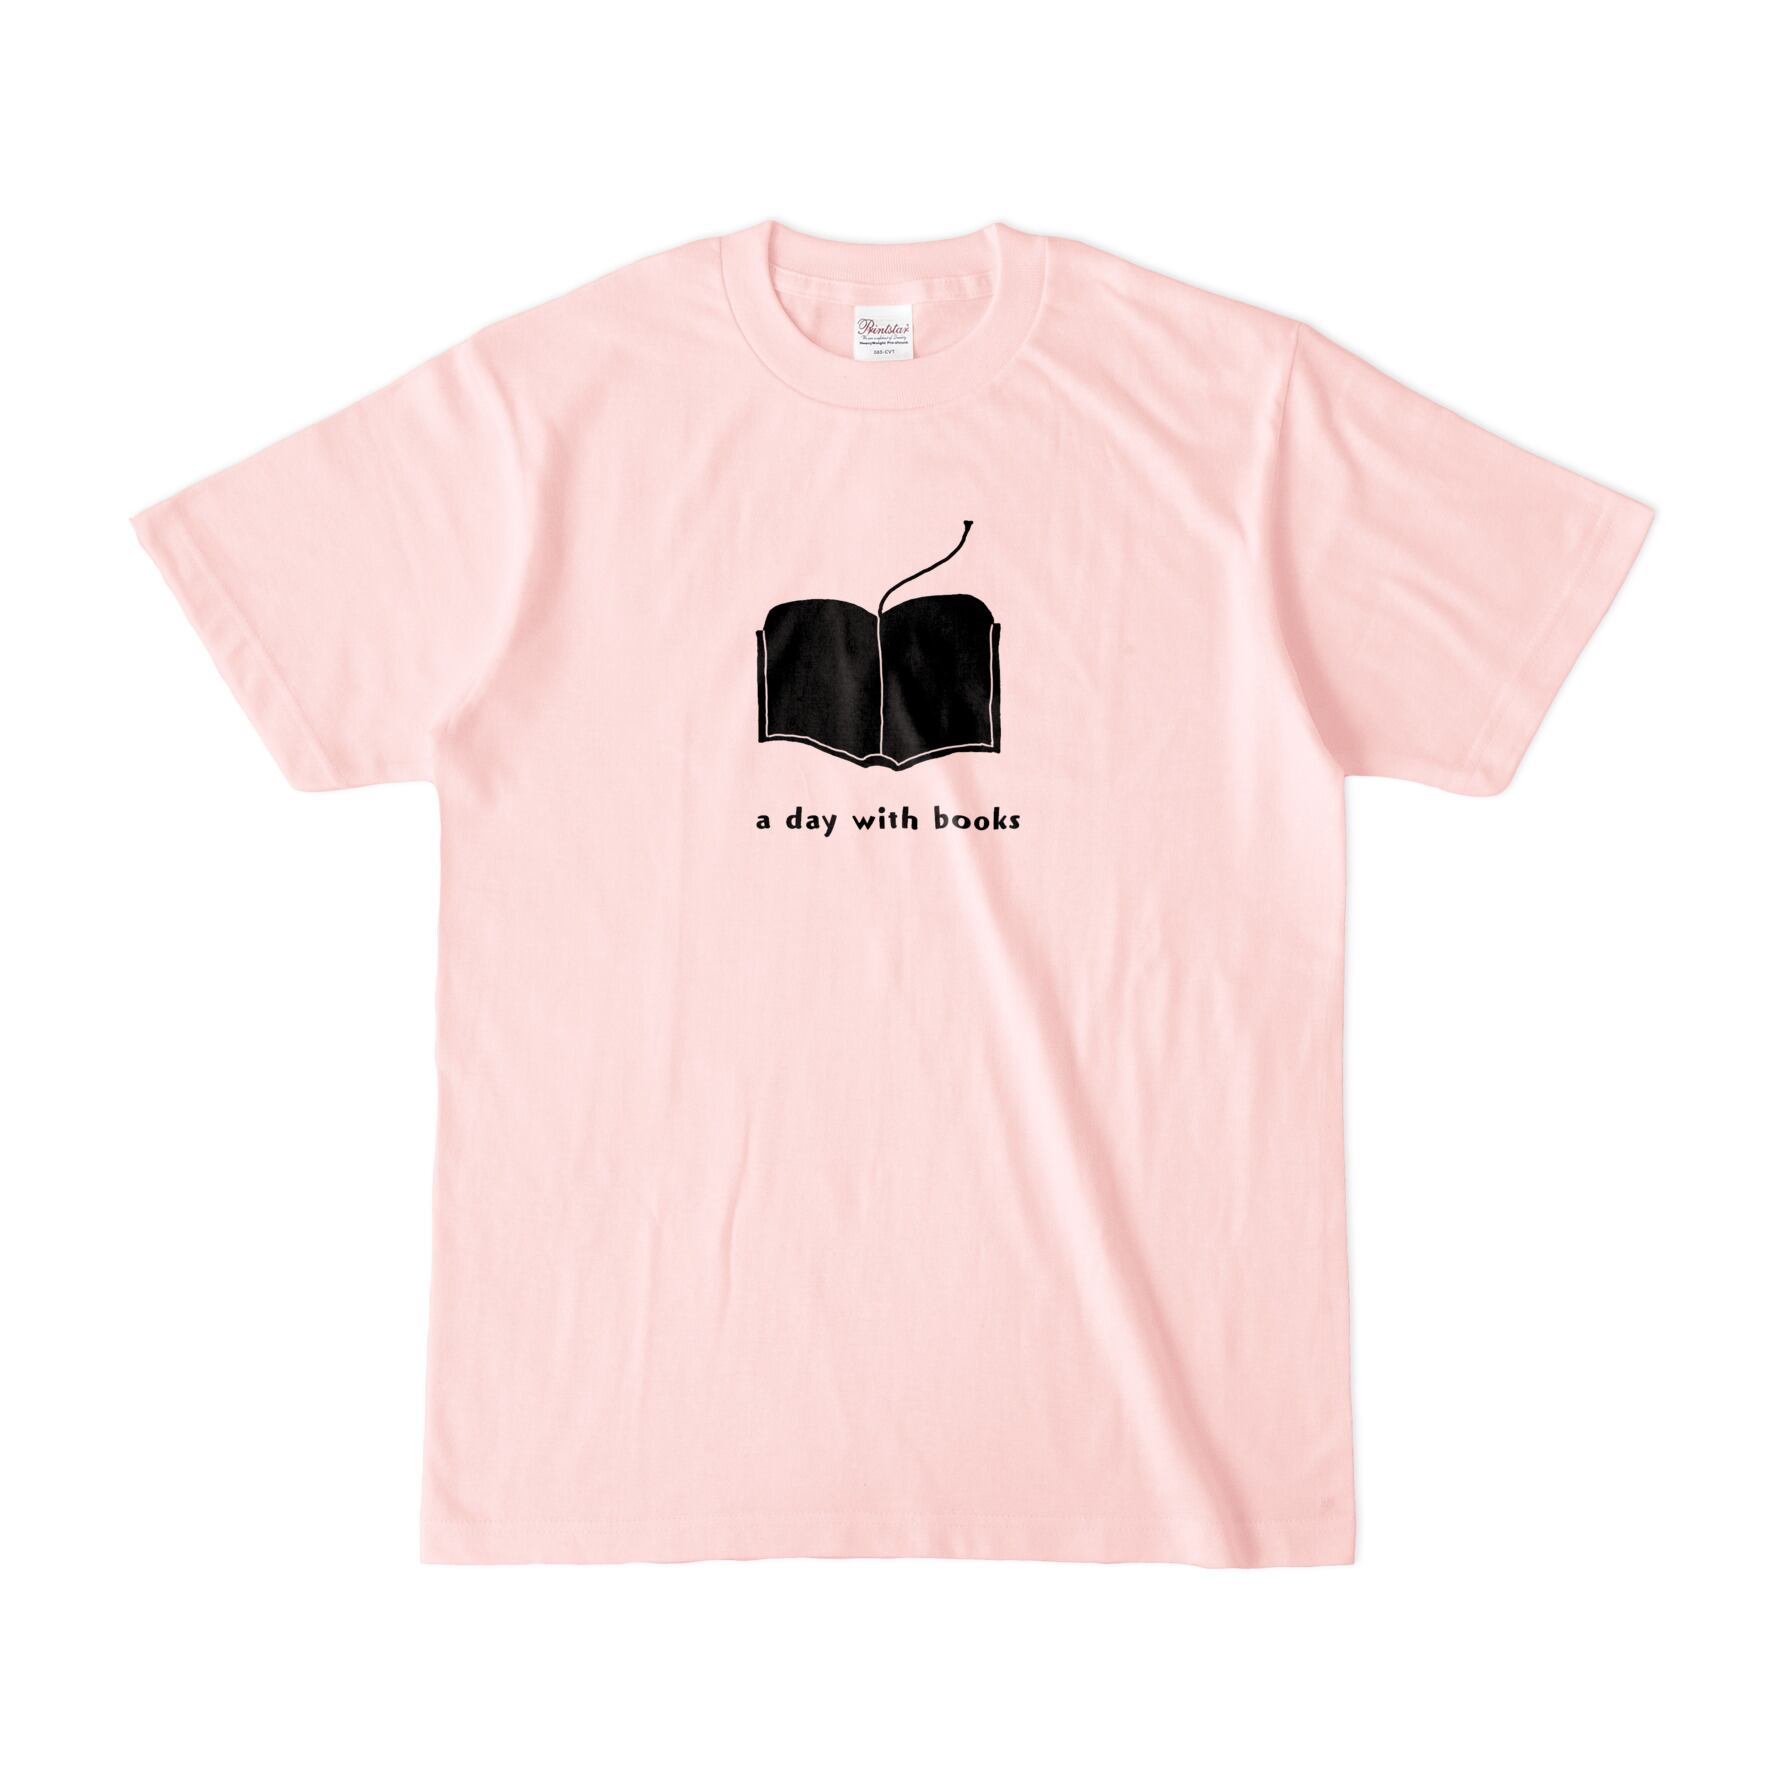 Tシャツ「a day with books」（ピンク、各サイズ）